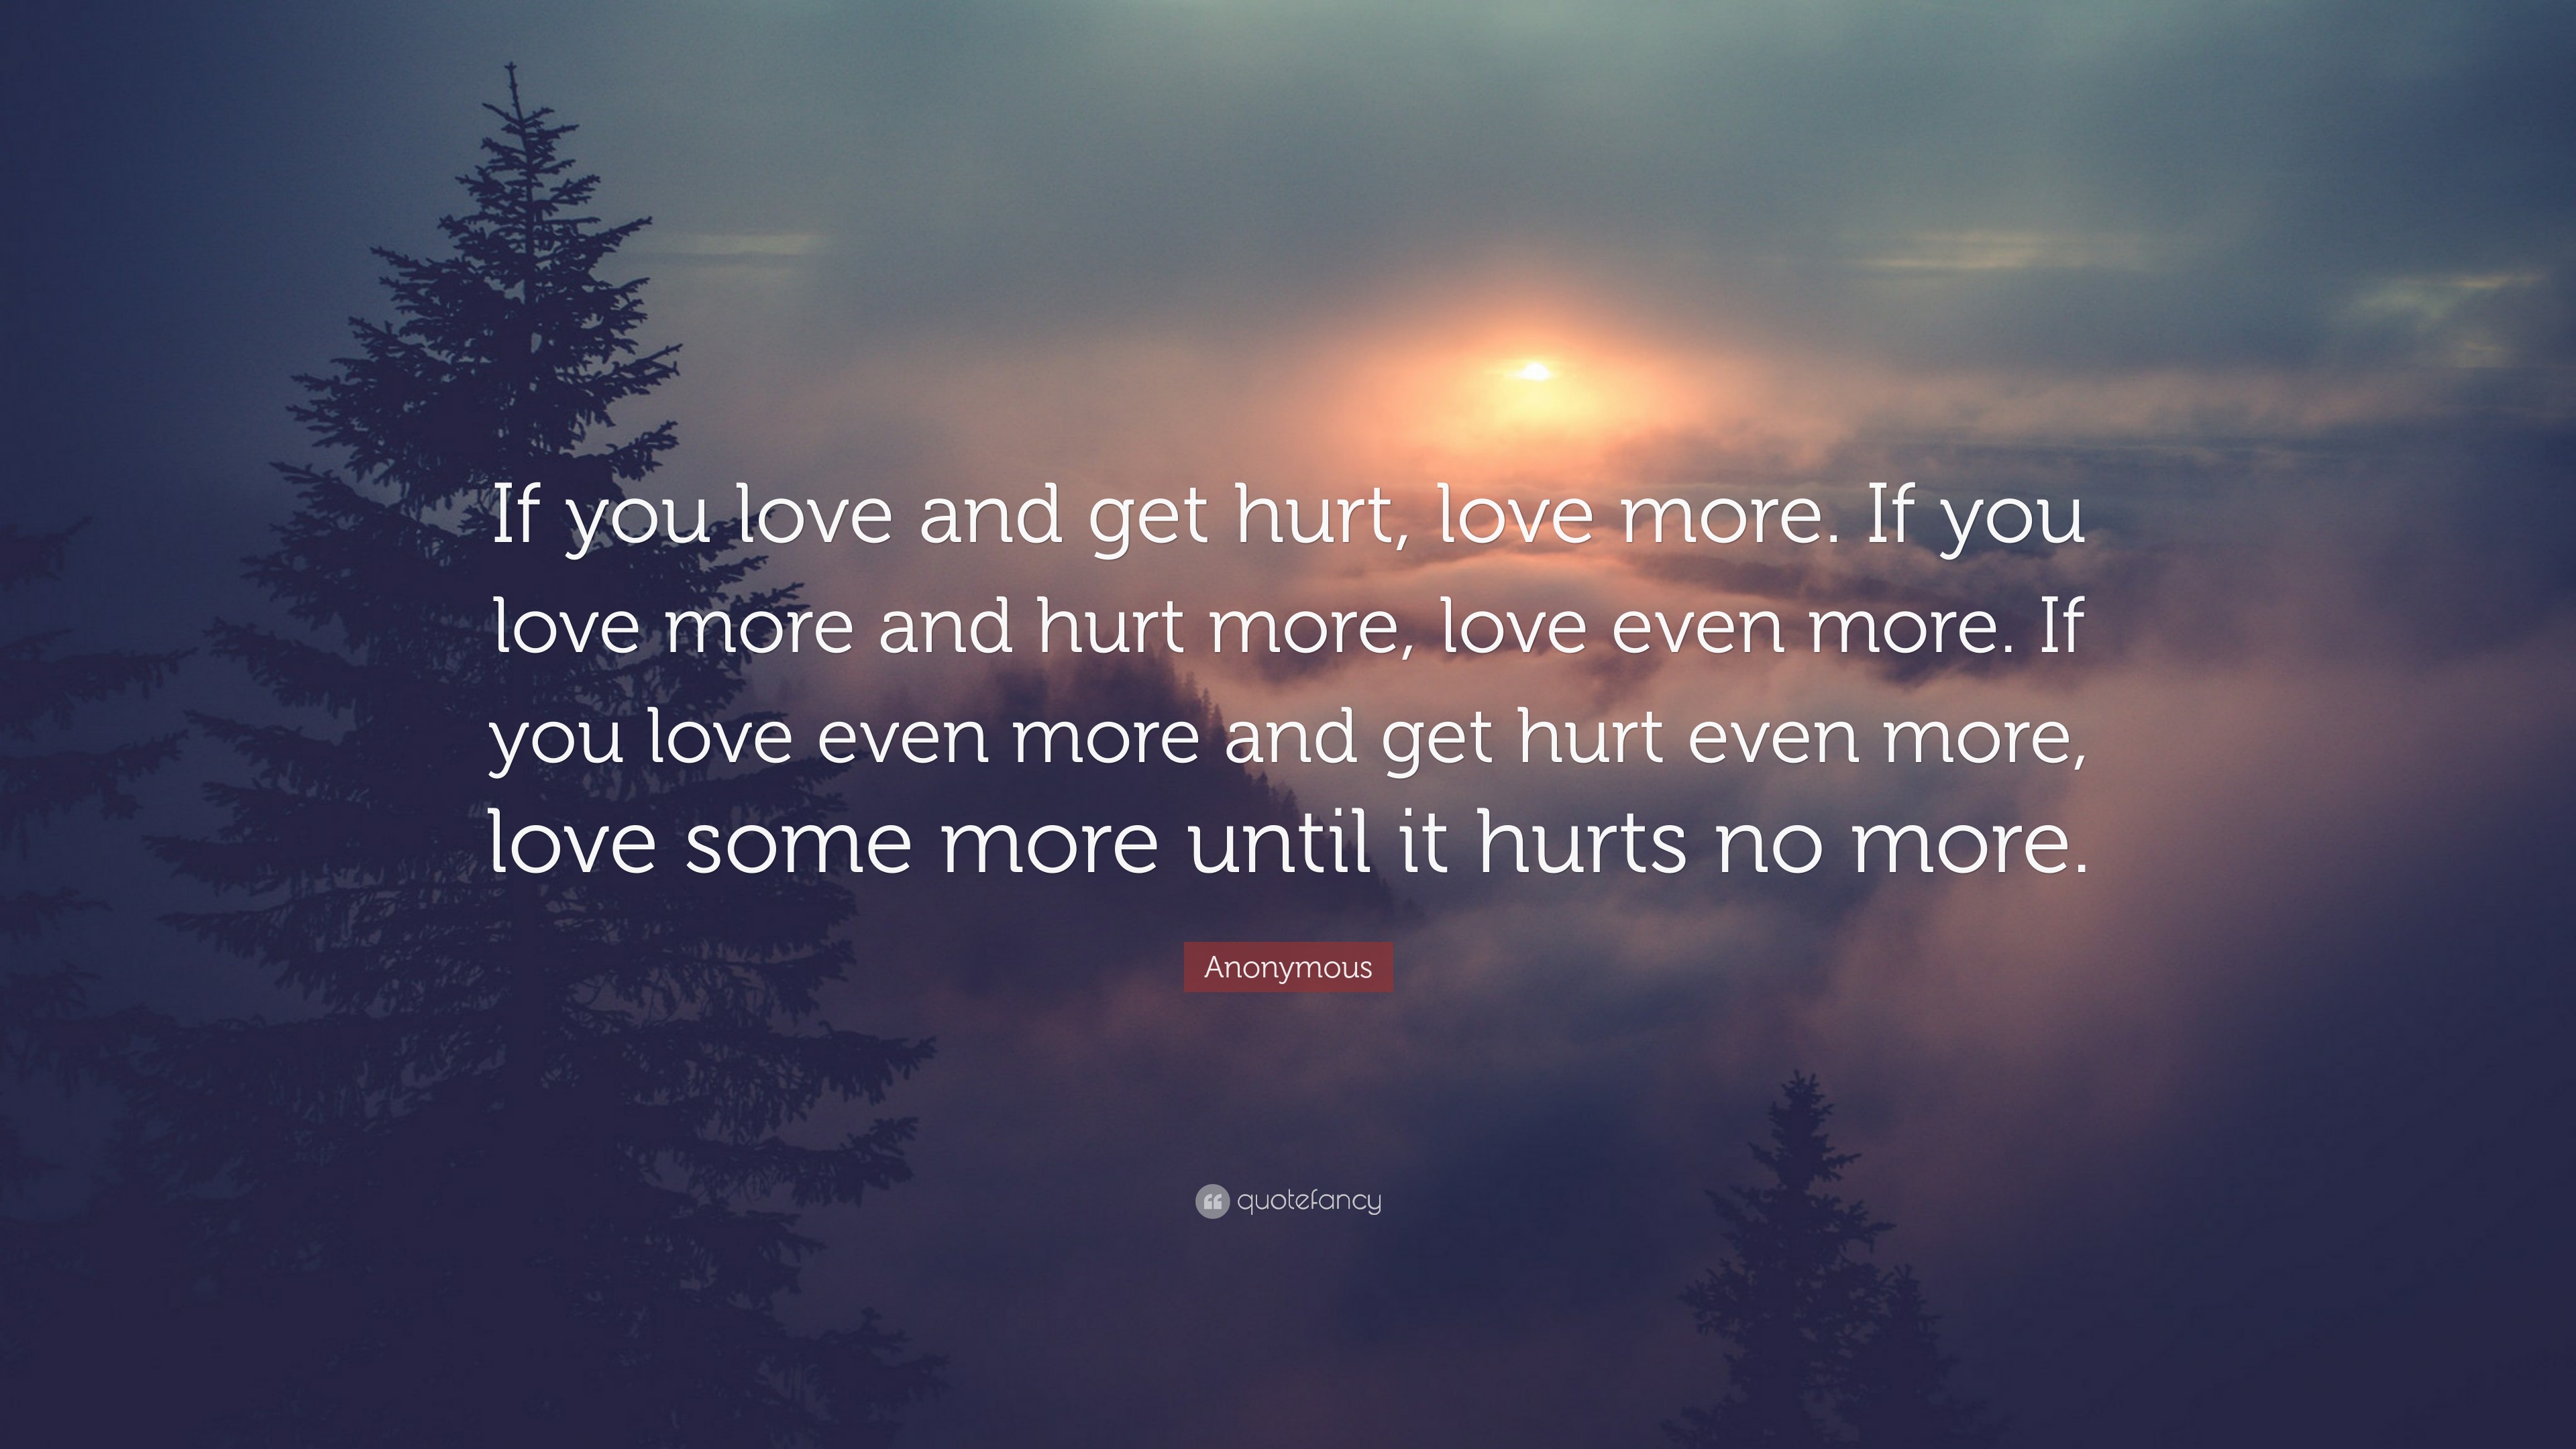 William Shakespeare Quote “If You Love And Get Hurt Love More William Shakespeare Quote If You Love And Get Hurt Love More If William Shakespeare If